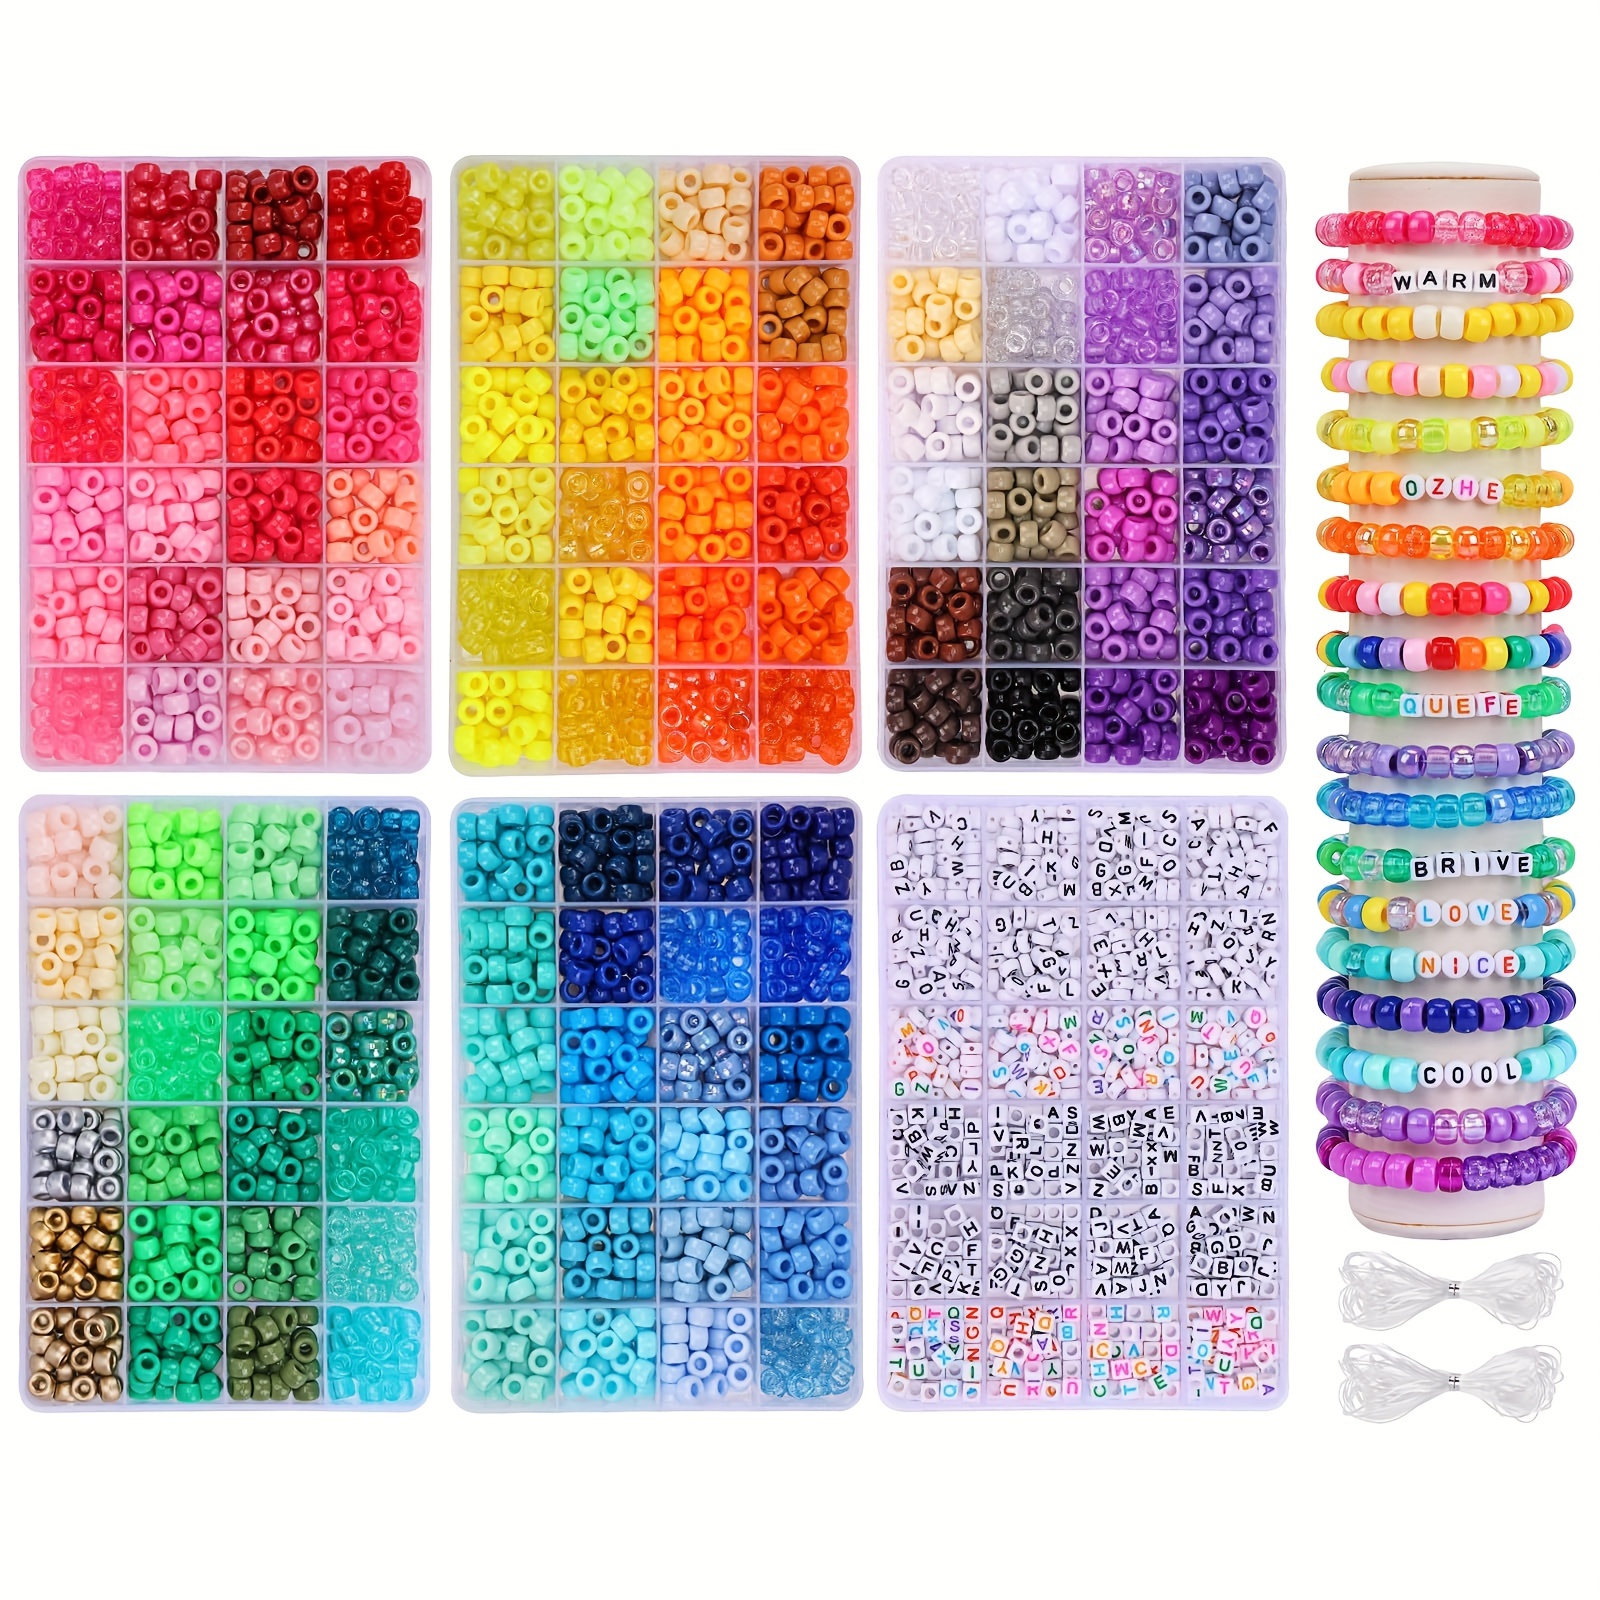 Quefe 3960pcs Pony Beads Craft Bead Set, 2400pcs Rainbow Beads in 48 Colors  and 1560pcs Letter Beads with 20 Meter Elastic Threads for Bracelet Jewelry  Necklace Making